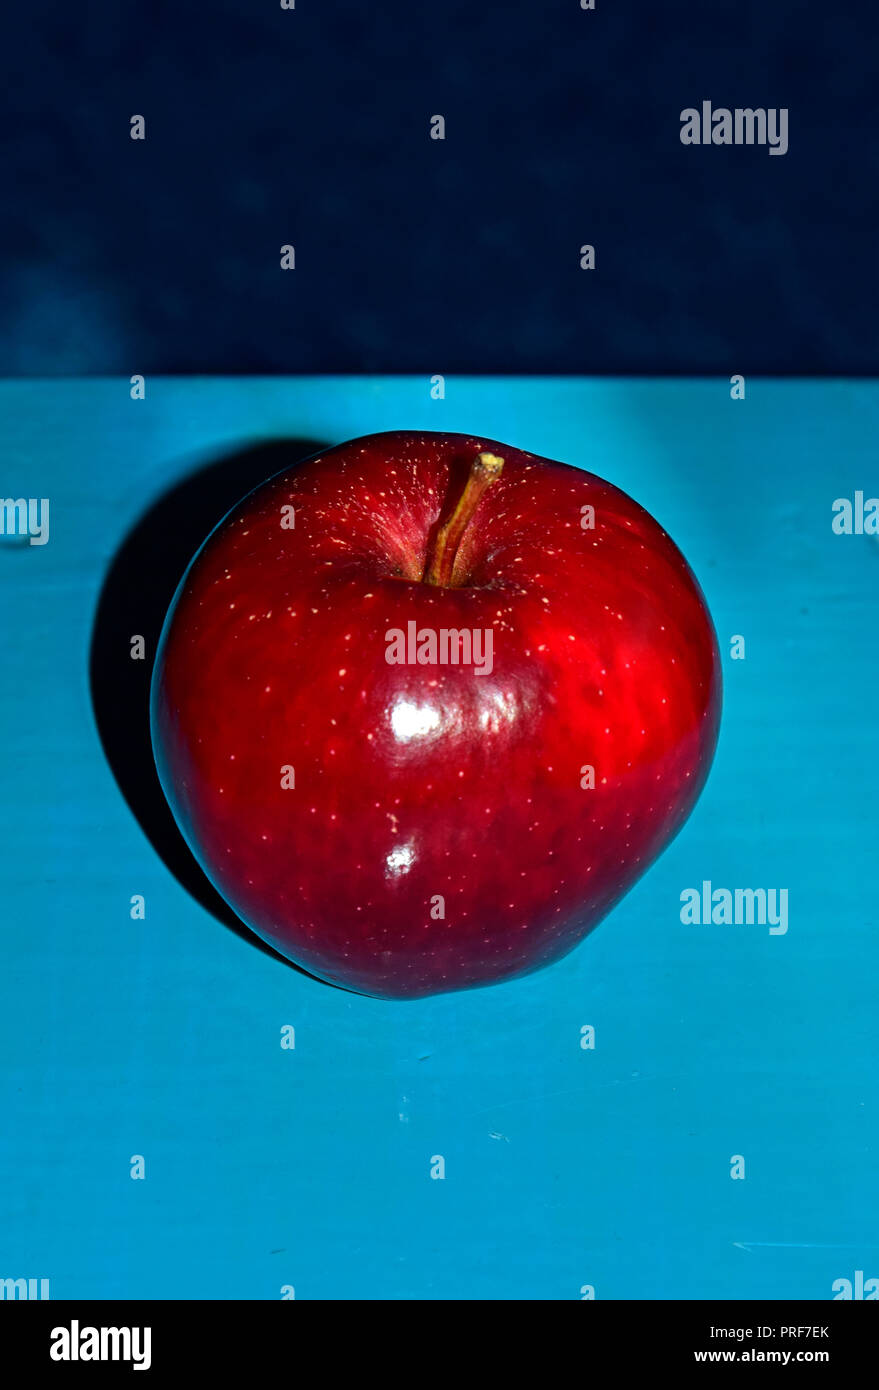 A waxy, dark red apple with white spots, lain on turquoise blue desktop, casting strong shadow, close-up view Stock Photo